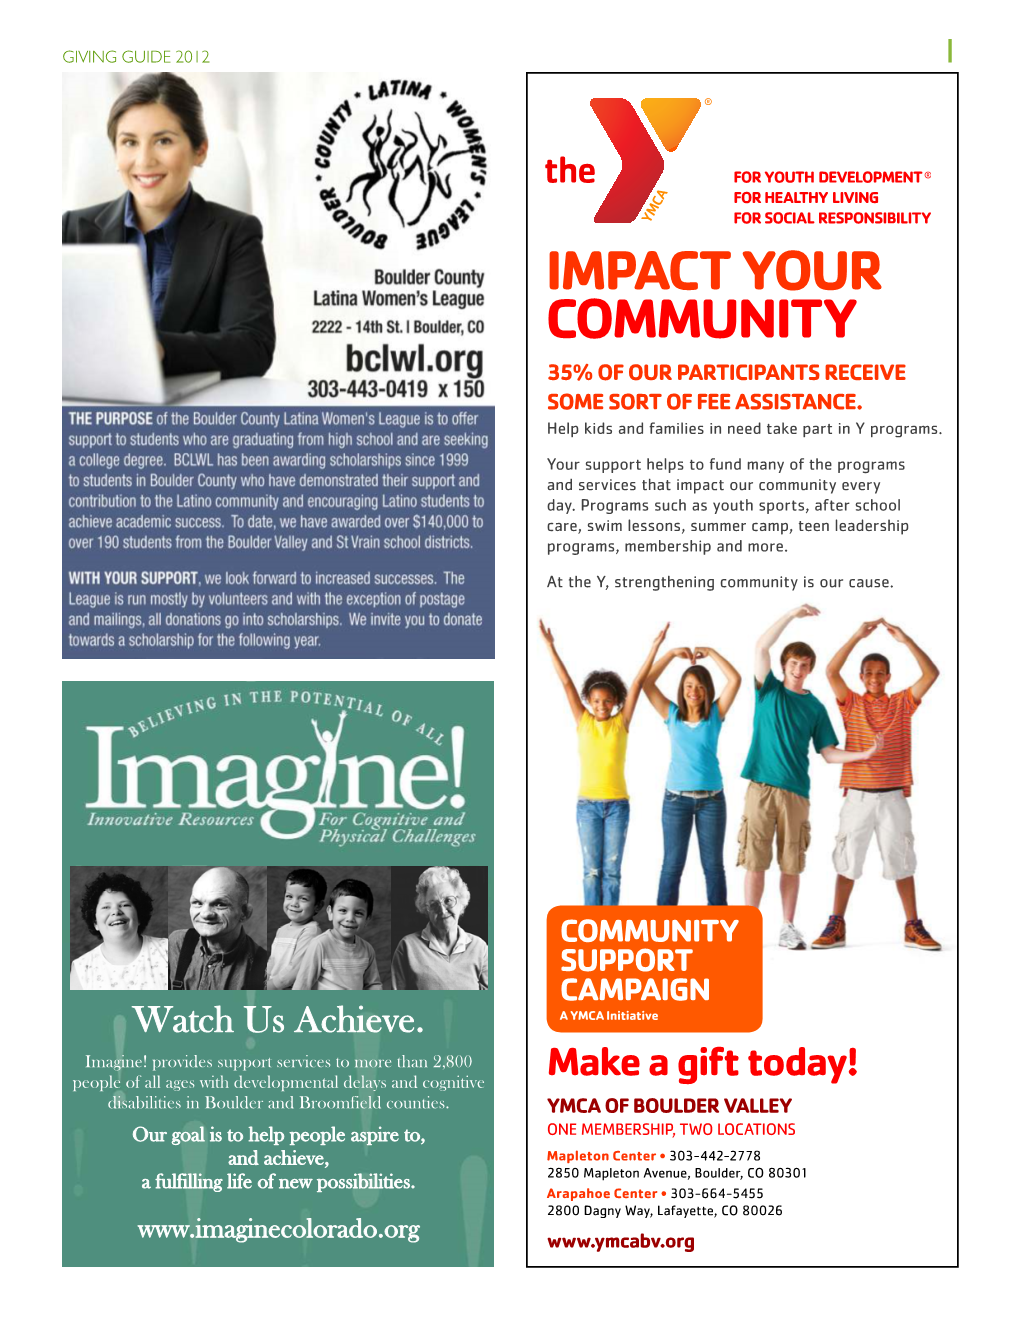 Impact Your Community 35% of Our Participants Receive Some Sort of Fee Assistance